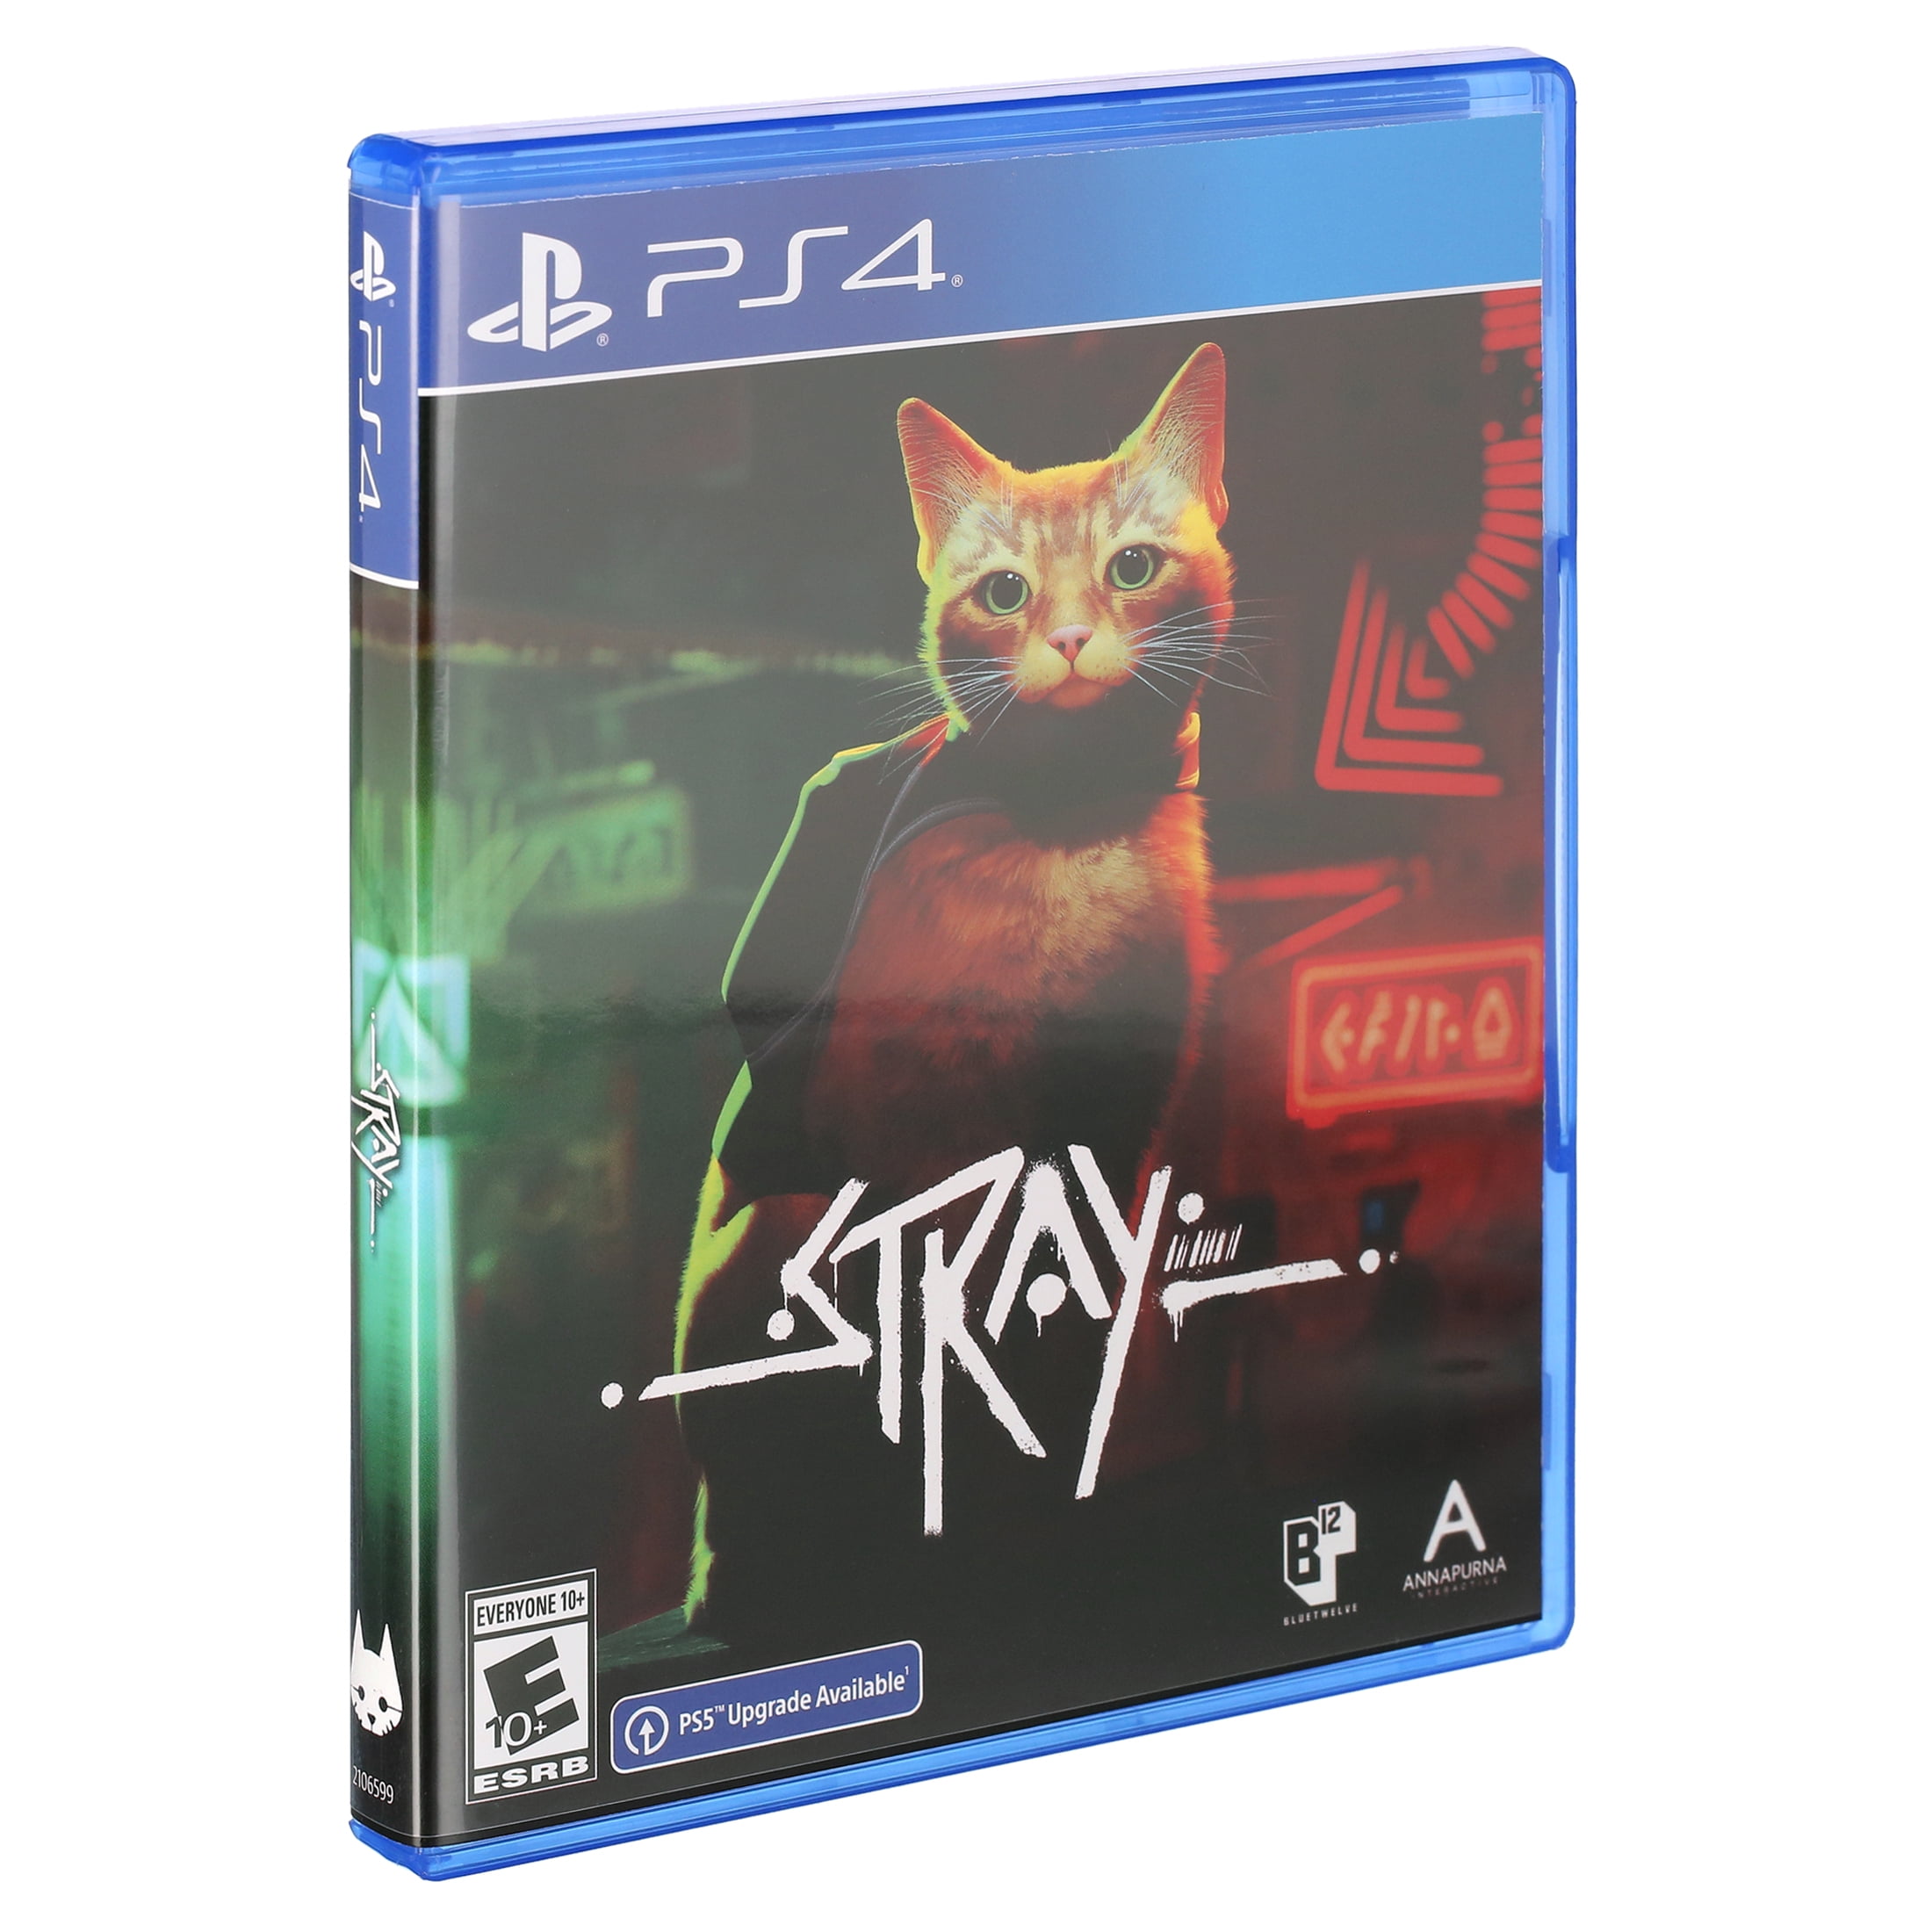 Stray PS4 with PS5 Upgrade Brand New Sealed with 6 Art Cards Fast Ship w  Trackin 811949035585